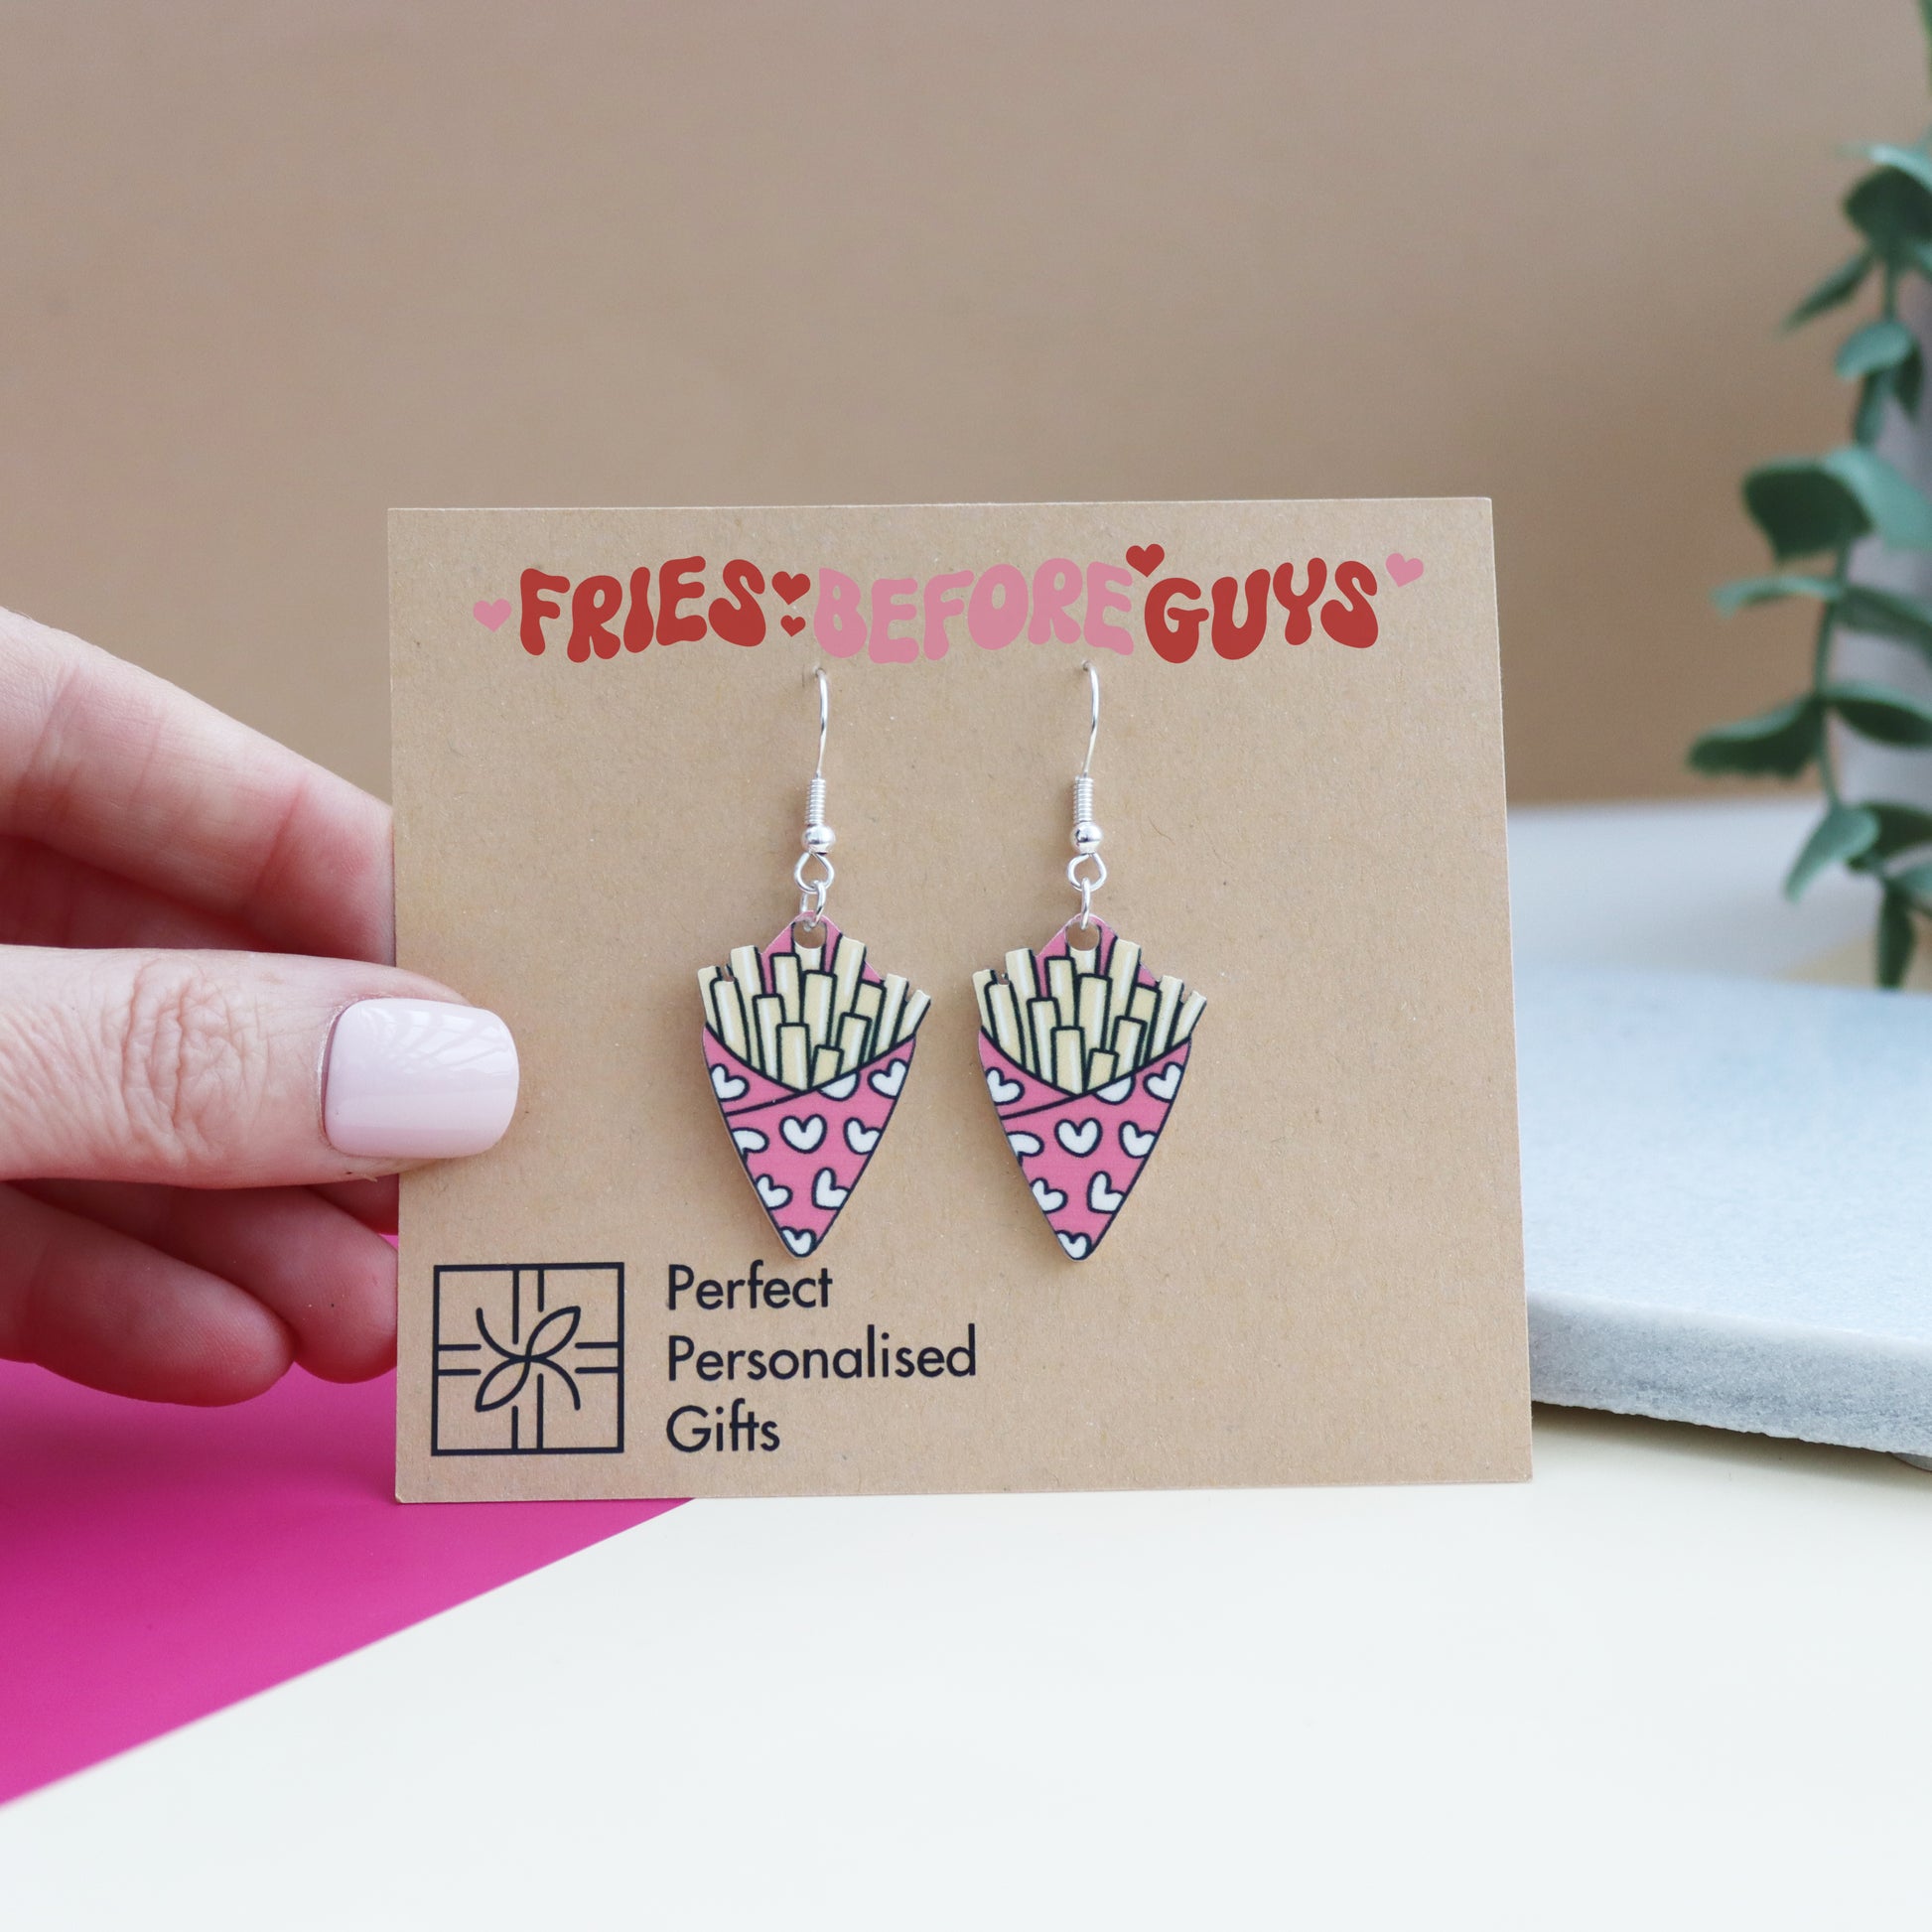 fries before guys earrings cut from acrylic and printed with a bag of chips design the bag of chips is pink shown on the backing card with the message fries before guys printed on the earring backing card